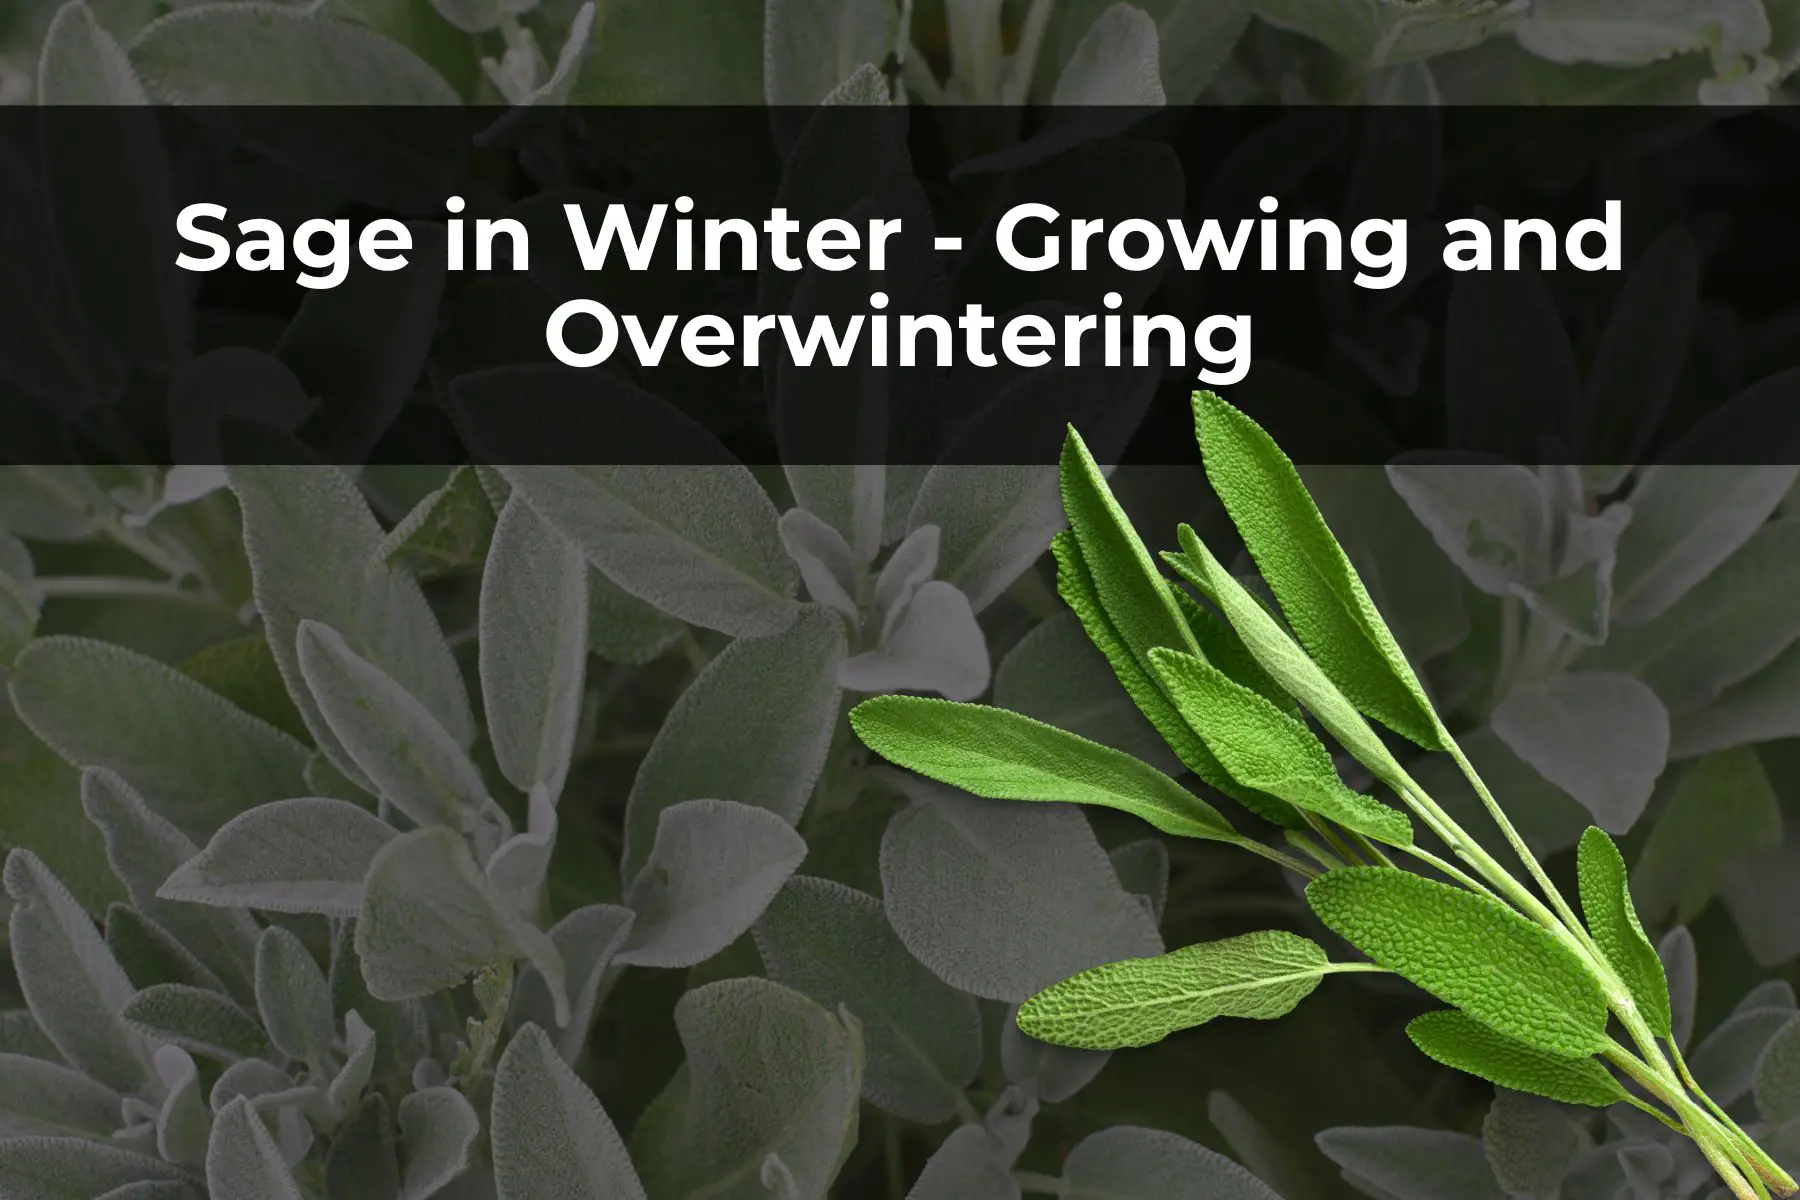 Sage in Winter - Growing and Overwintering